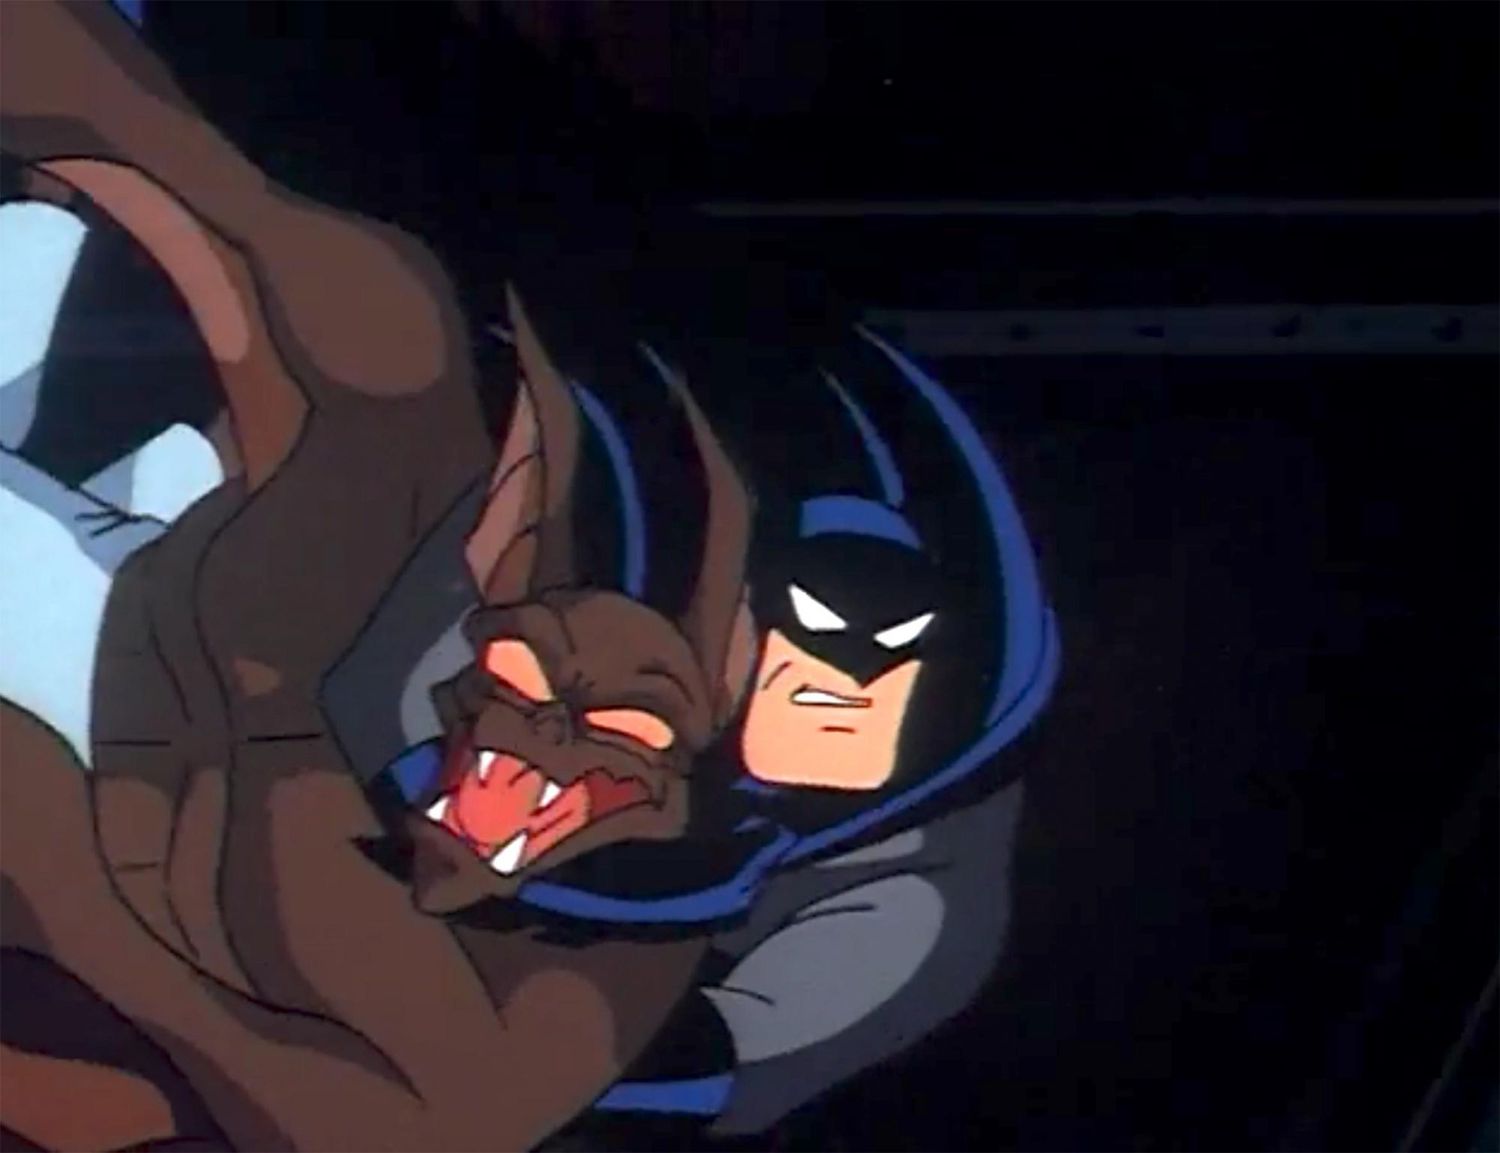 Batman: The Animated Series: 25 Best Episodes, ranked 